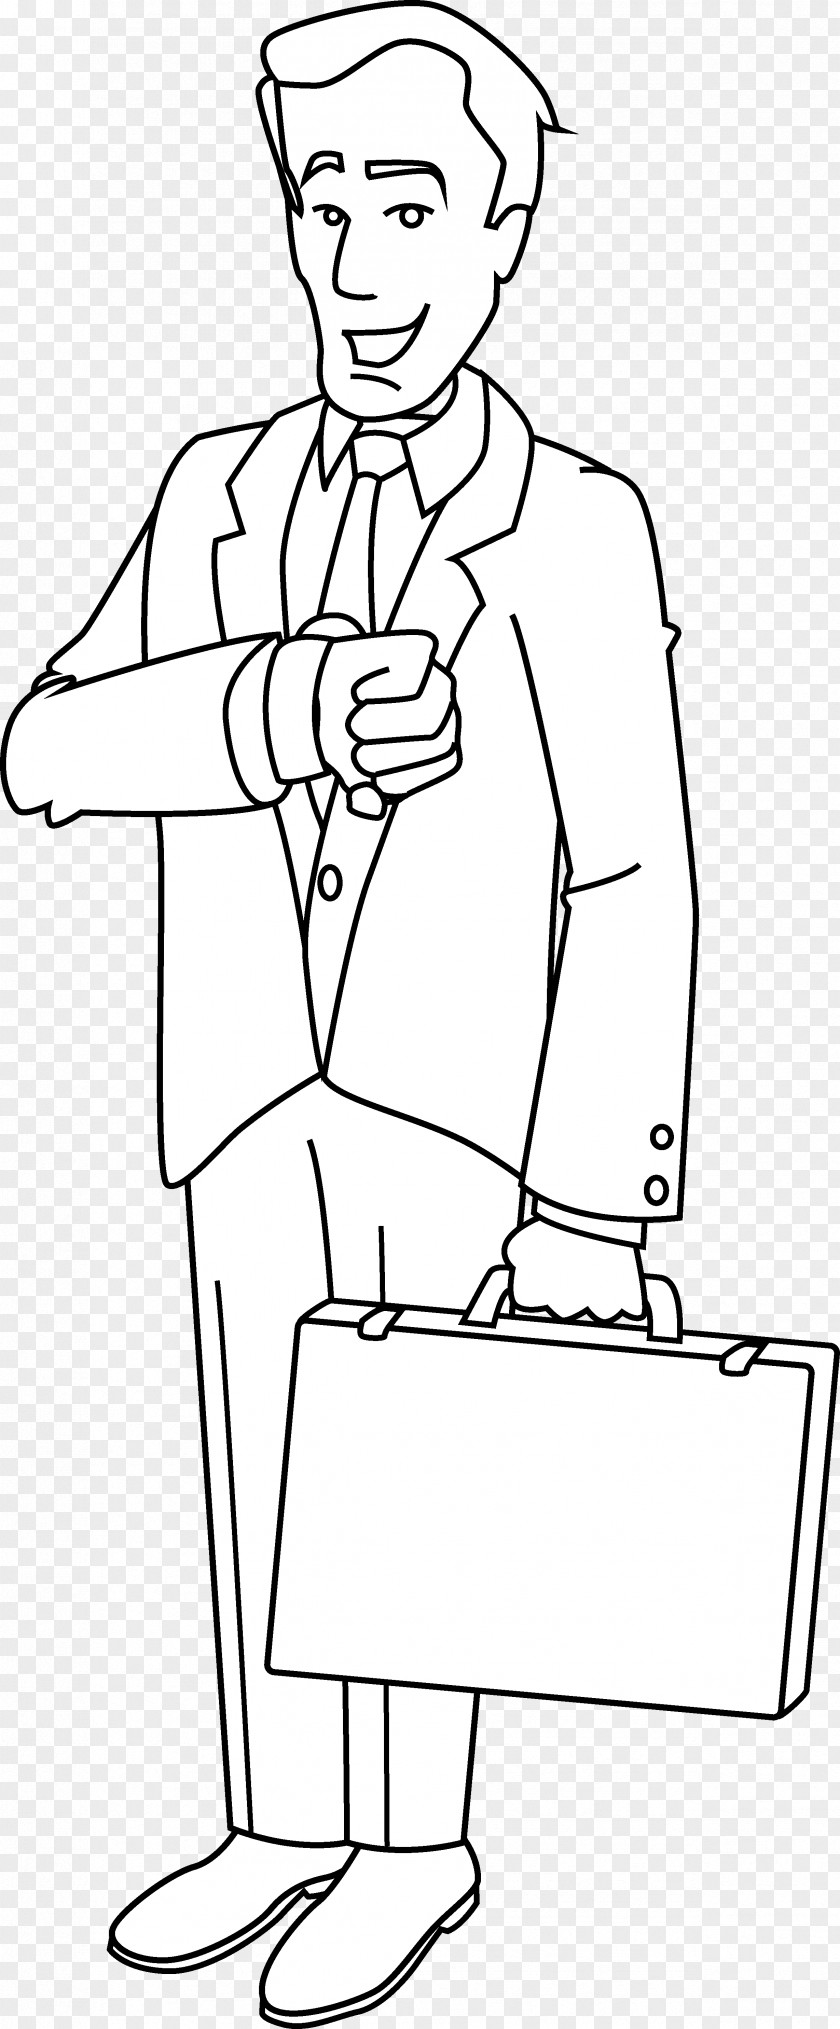 Buisness Vector Businessperson Coloring Book Clip Art PNG